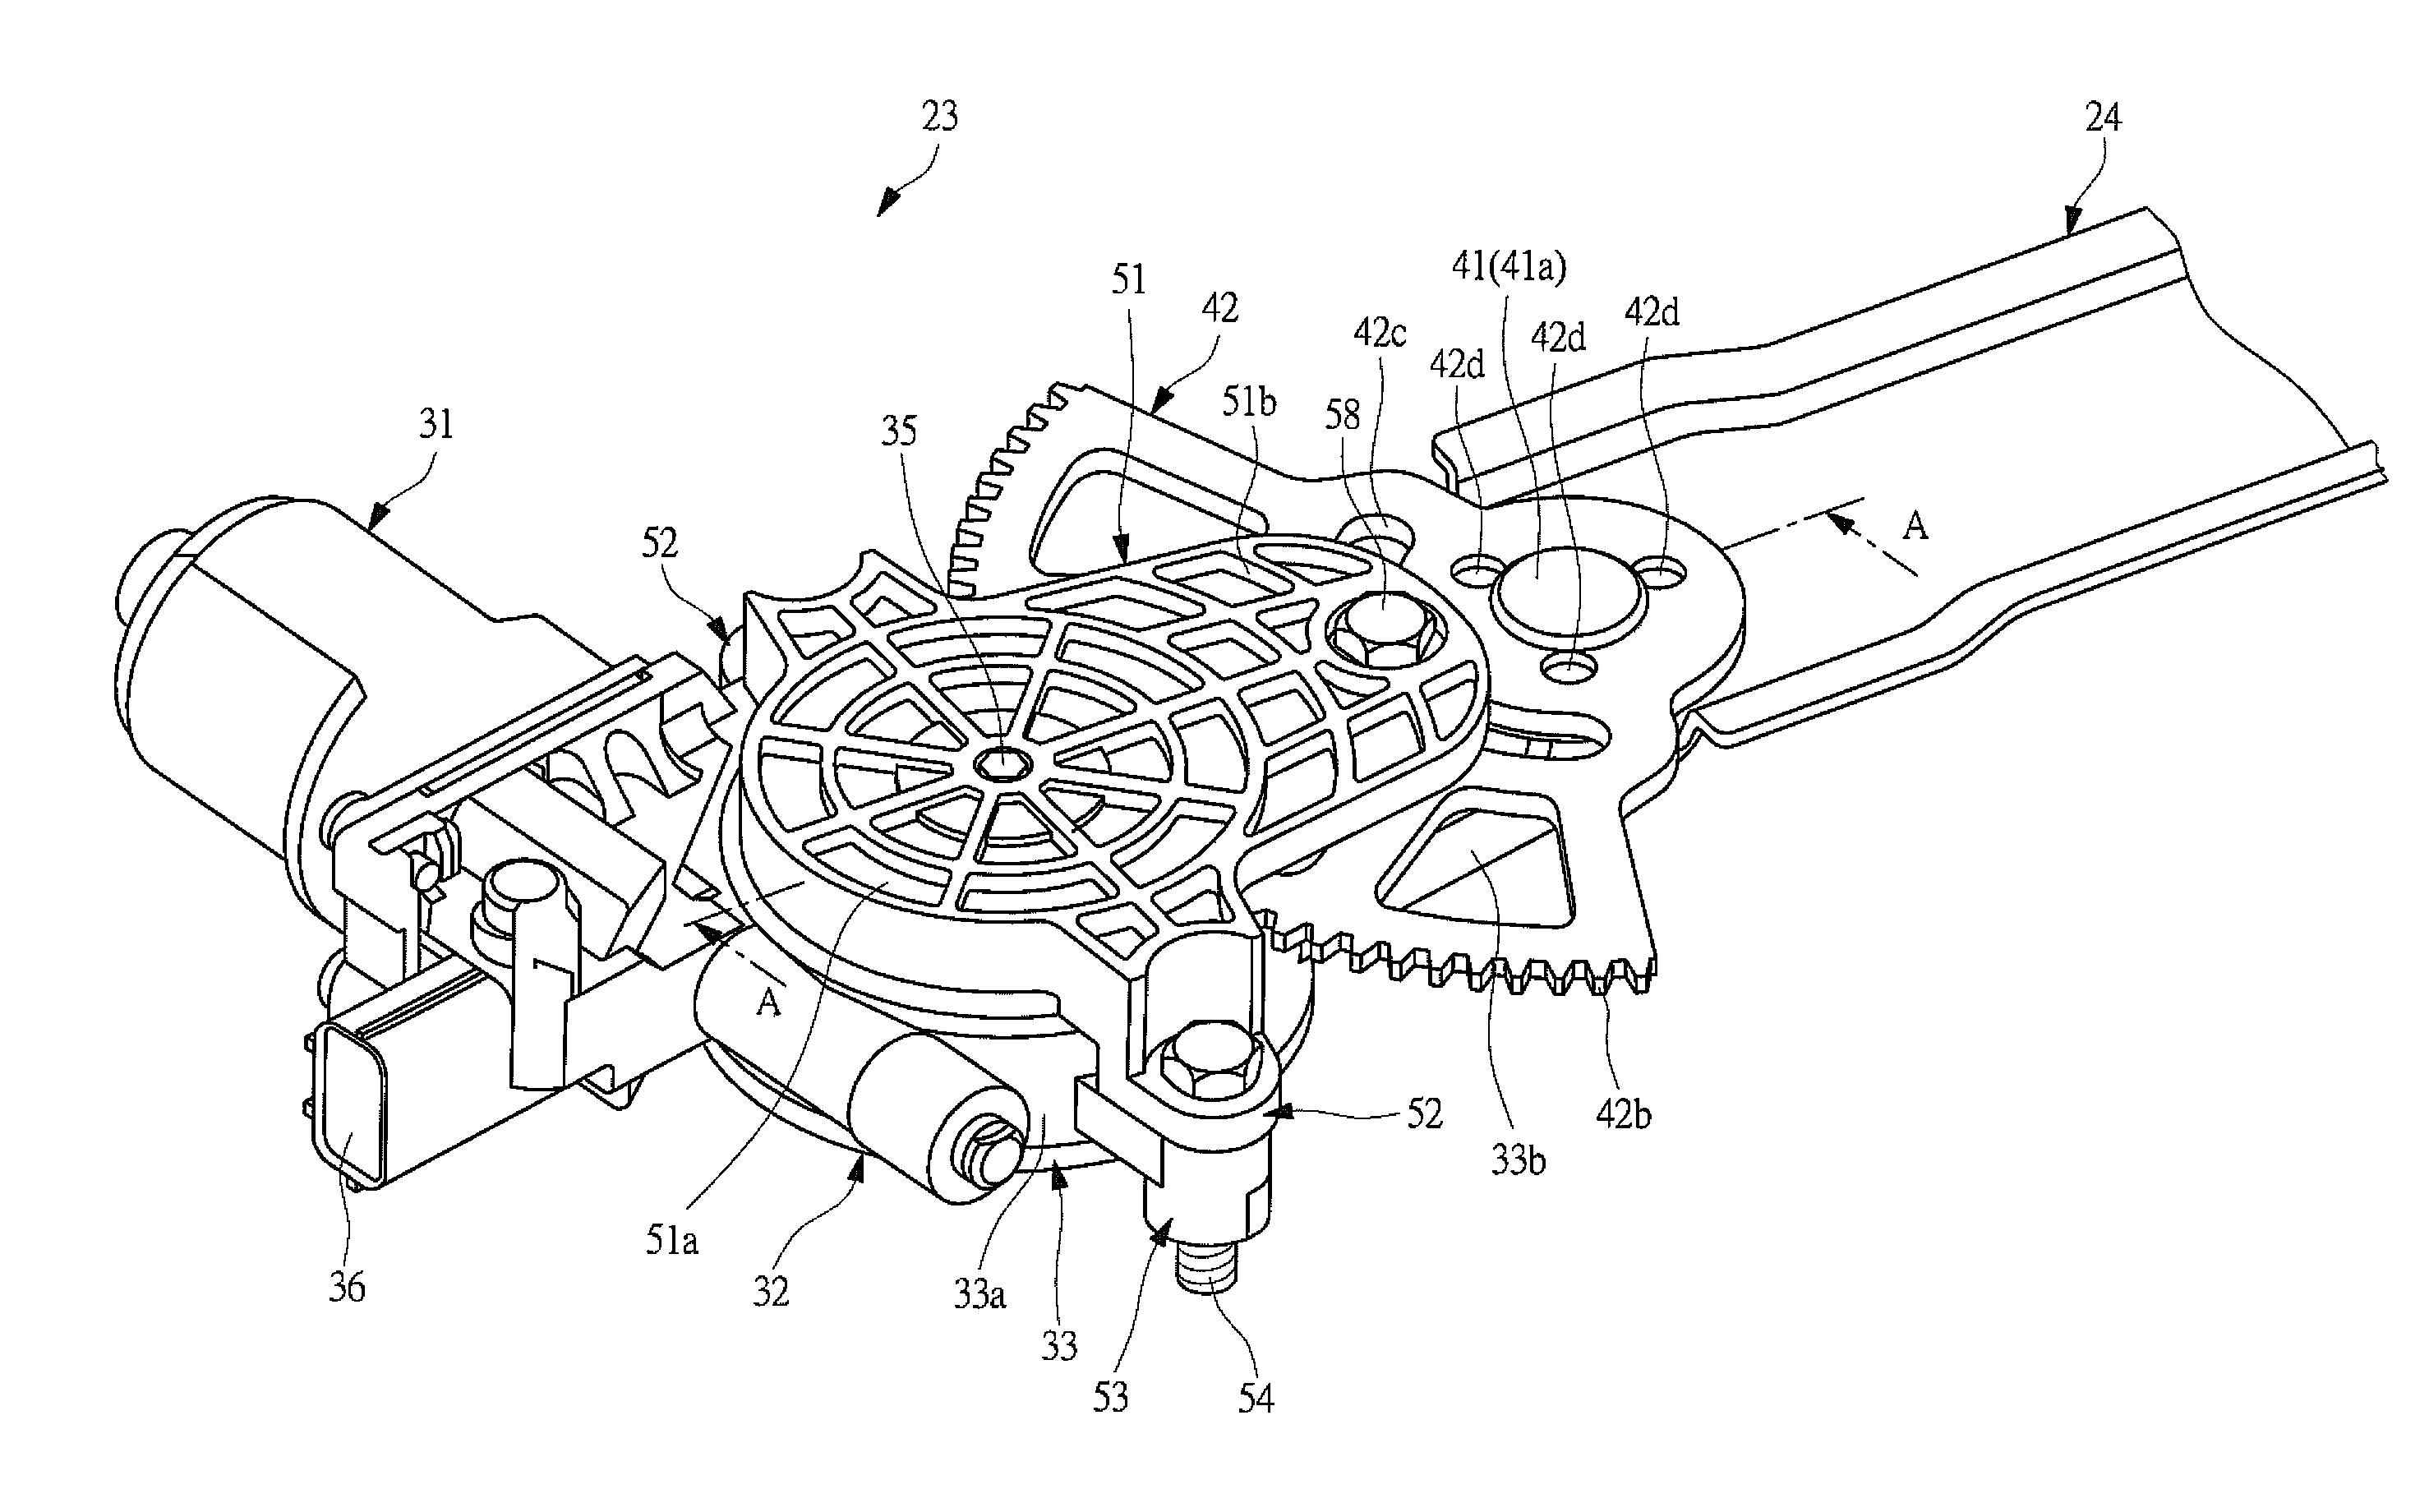 Automatic opening and closing apparatus for vehicle